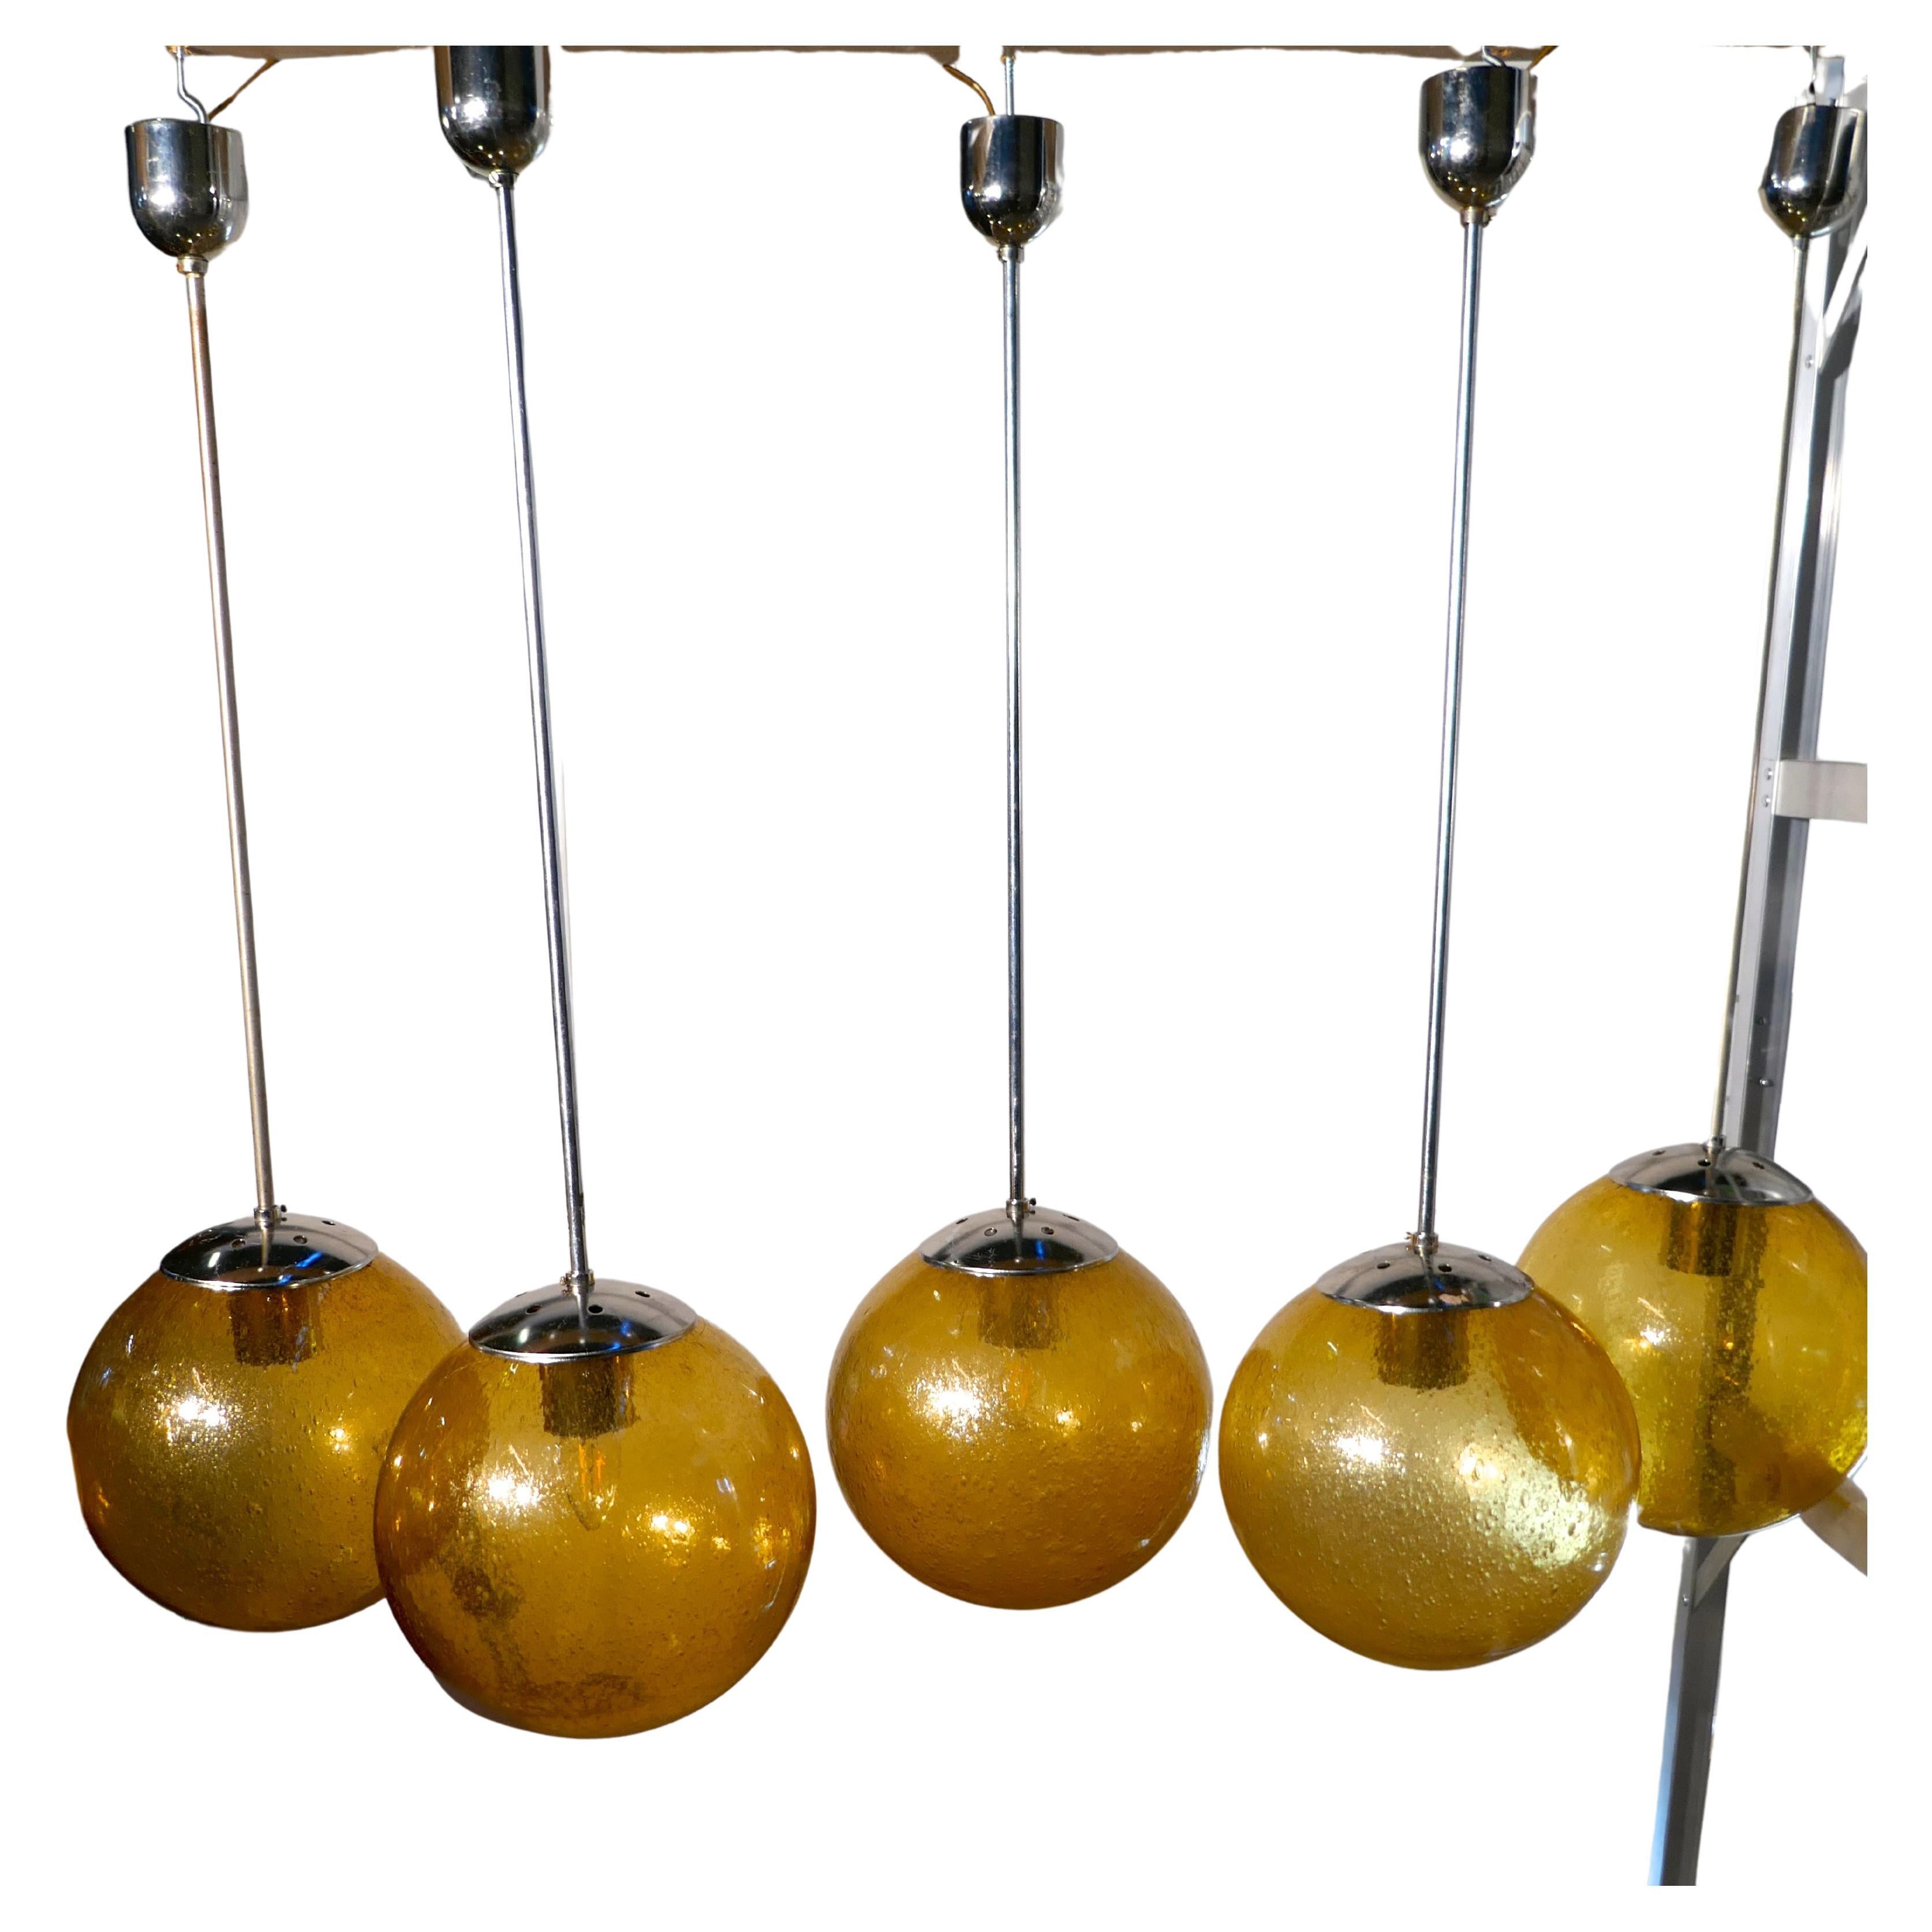 Set of 6 Large Retro Amber Globe and Chrome Lights

I rare find, these lights have been used but they are in close to original condition, the original Amber Glass Raindrop Globe Shades even have their original cardboard cartons
The globes are